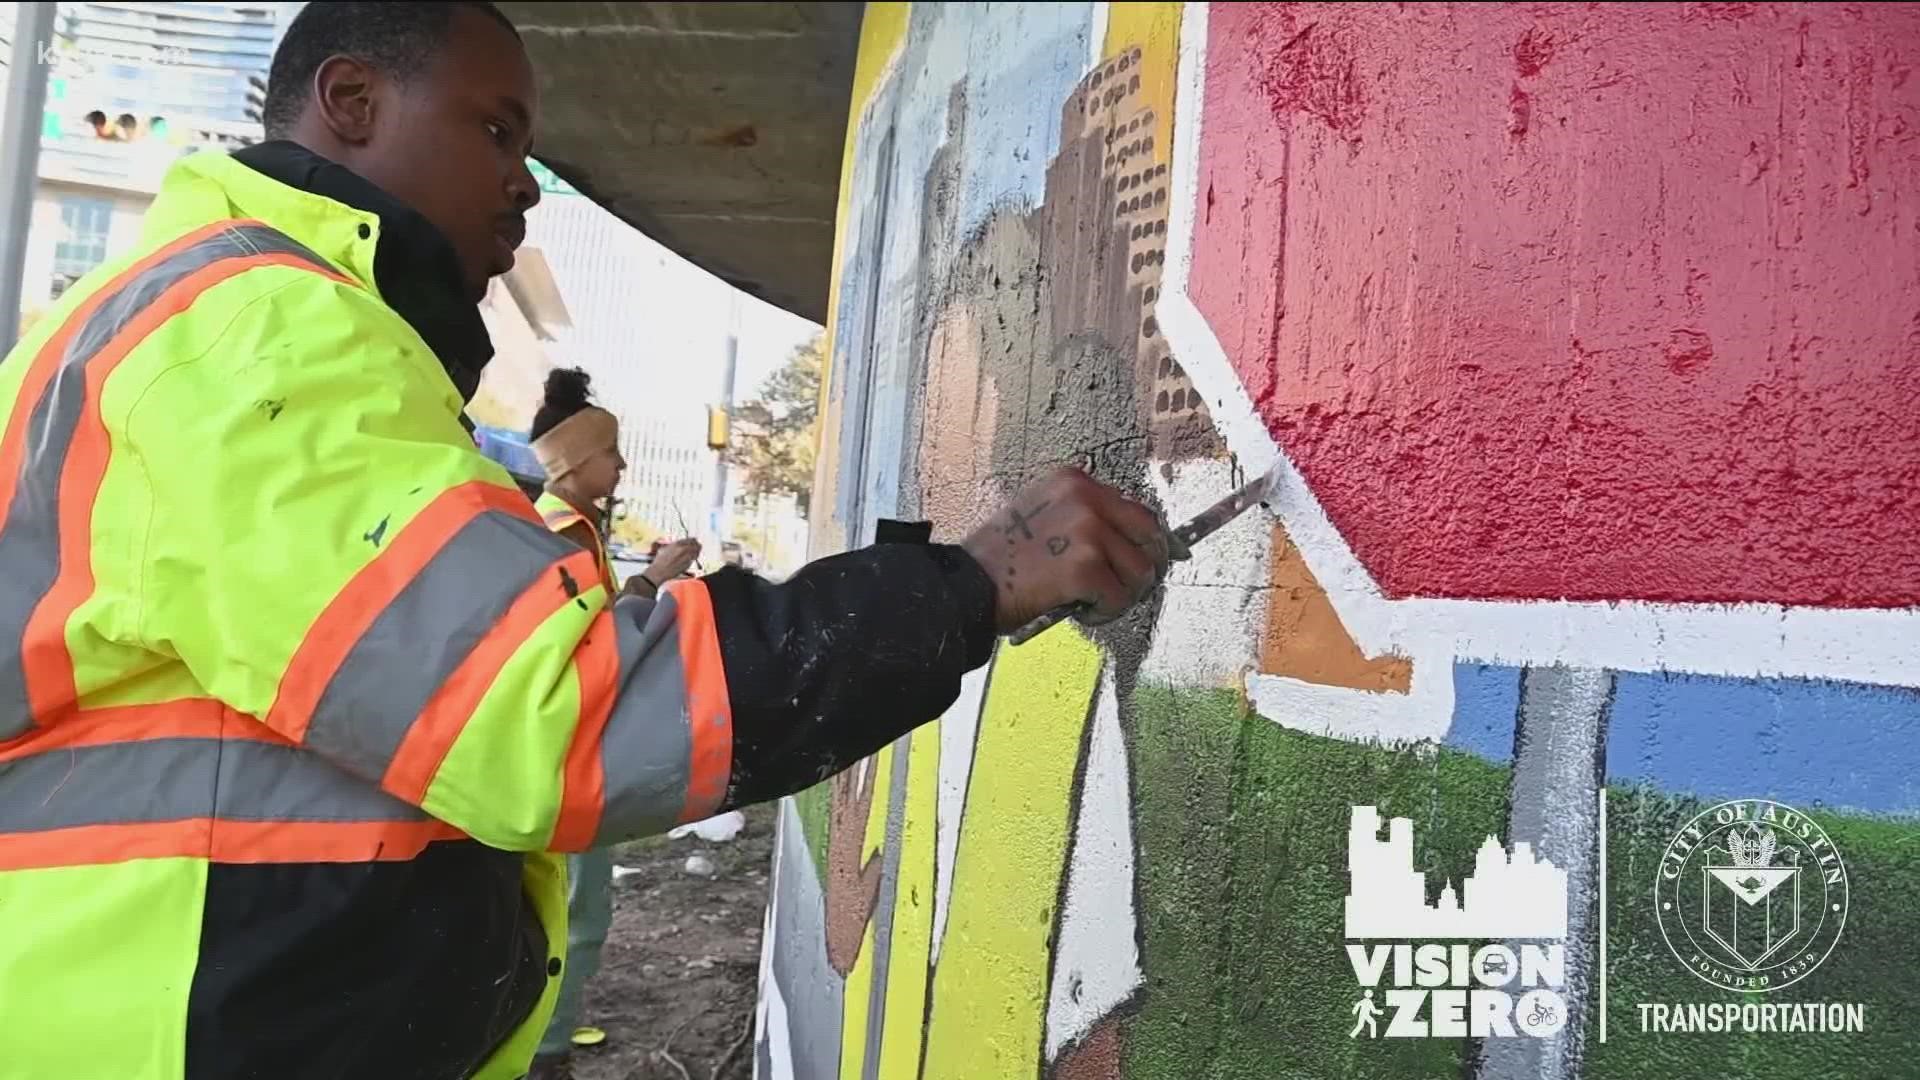 Three murals have been installed in support of the city's Vision Zero plan.